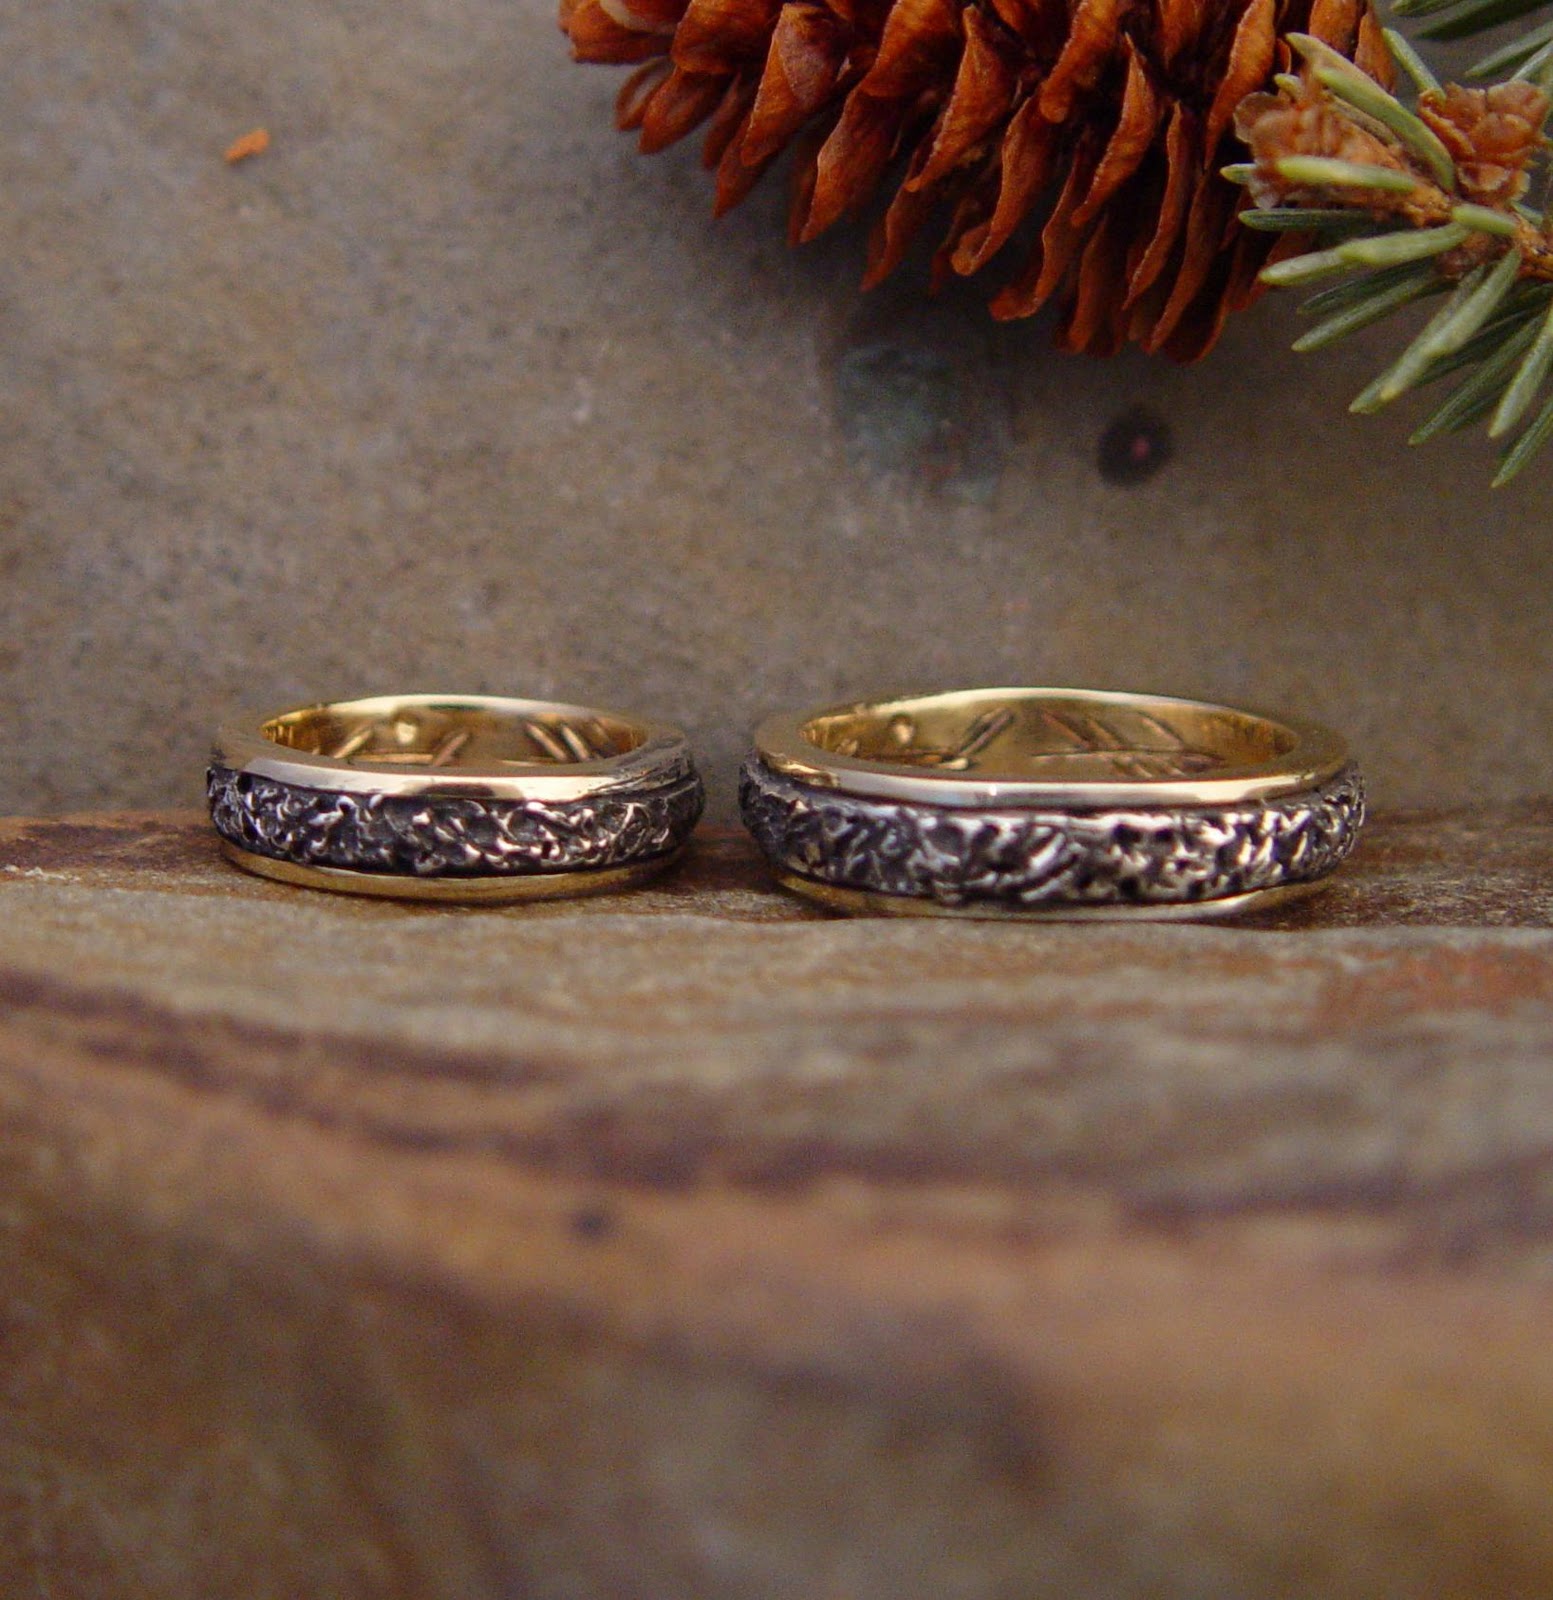 14k gold and Inlaid silver